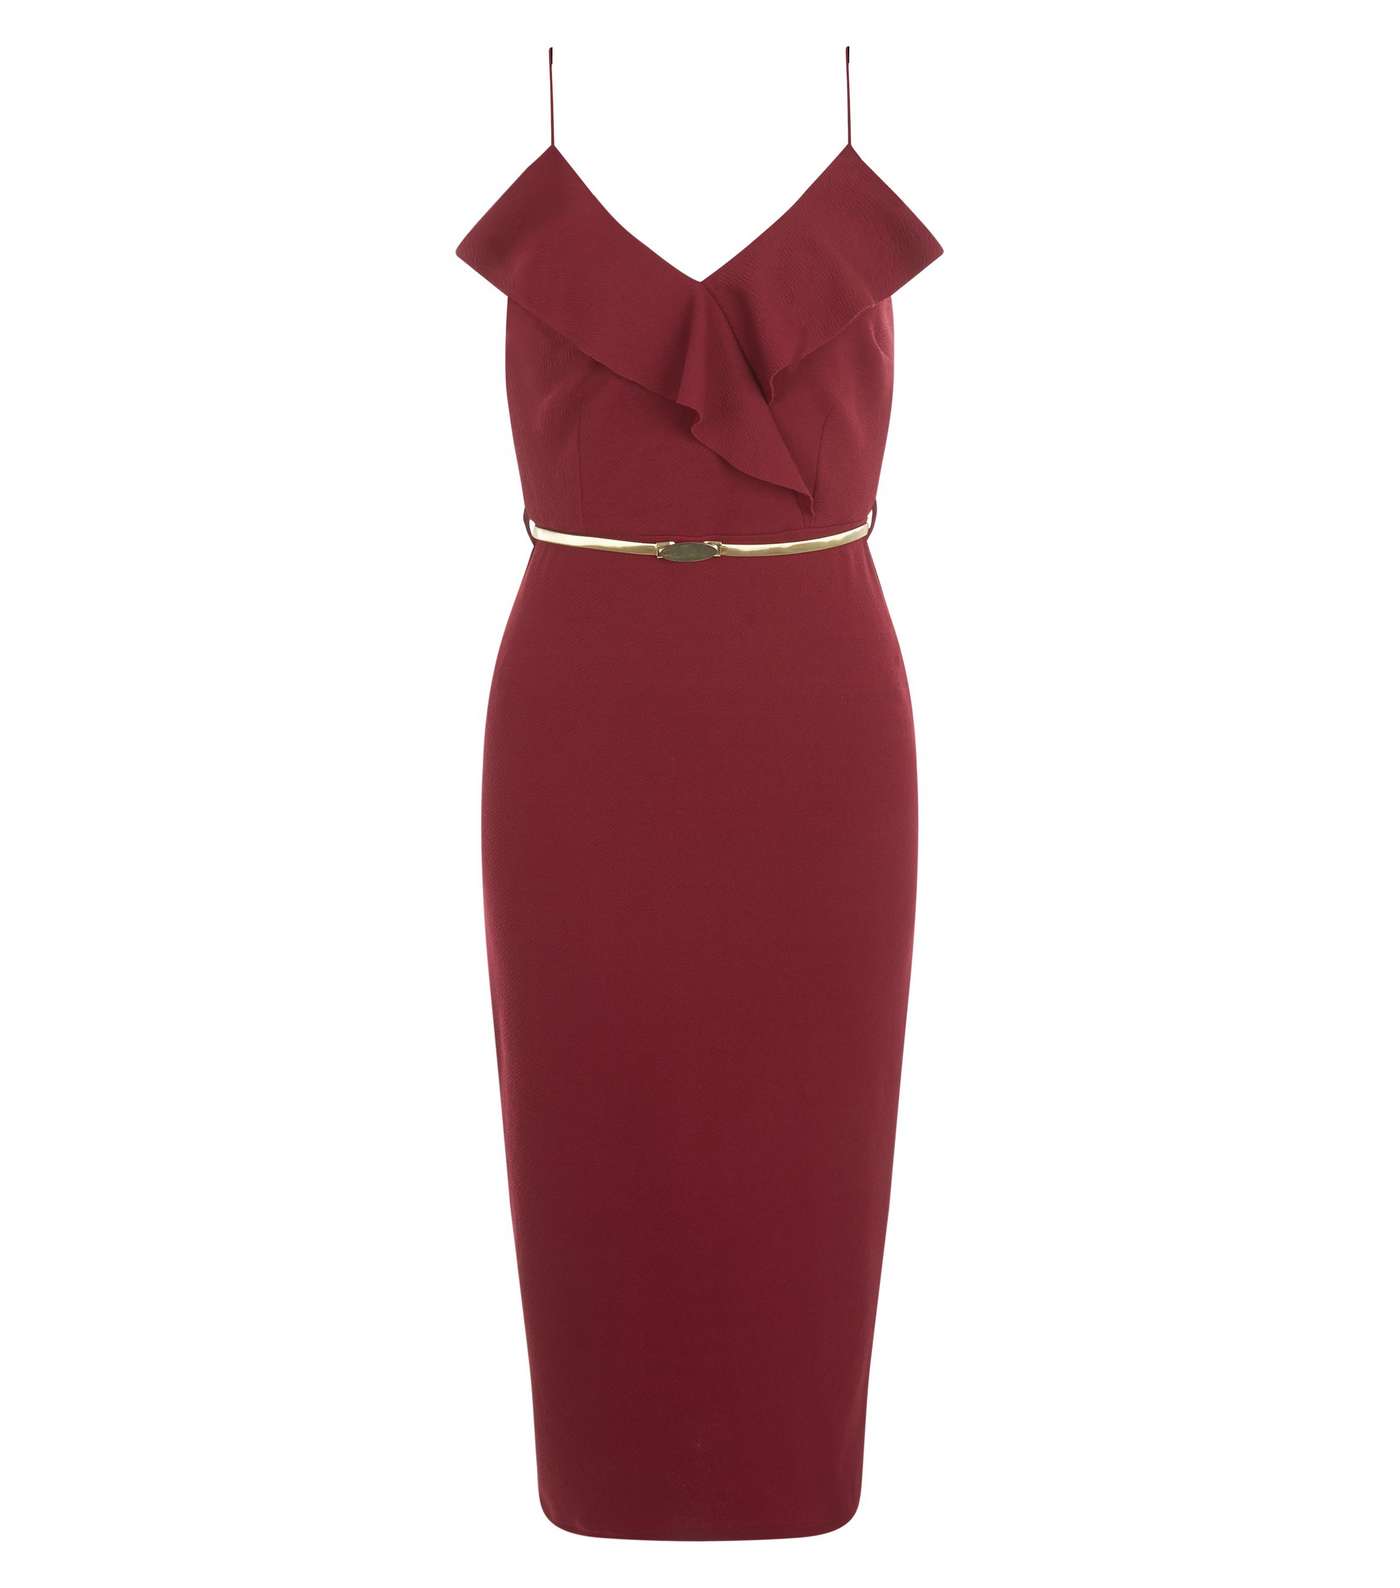 Burgundy Frill Trim Belted Bodycon Dress  Image 4